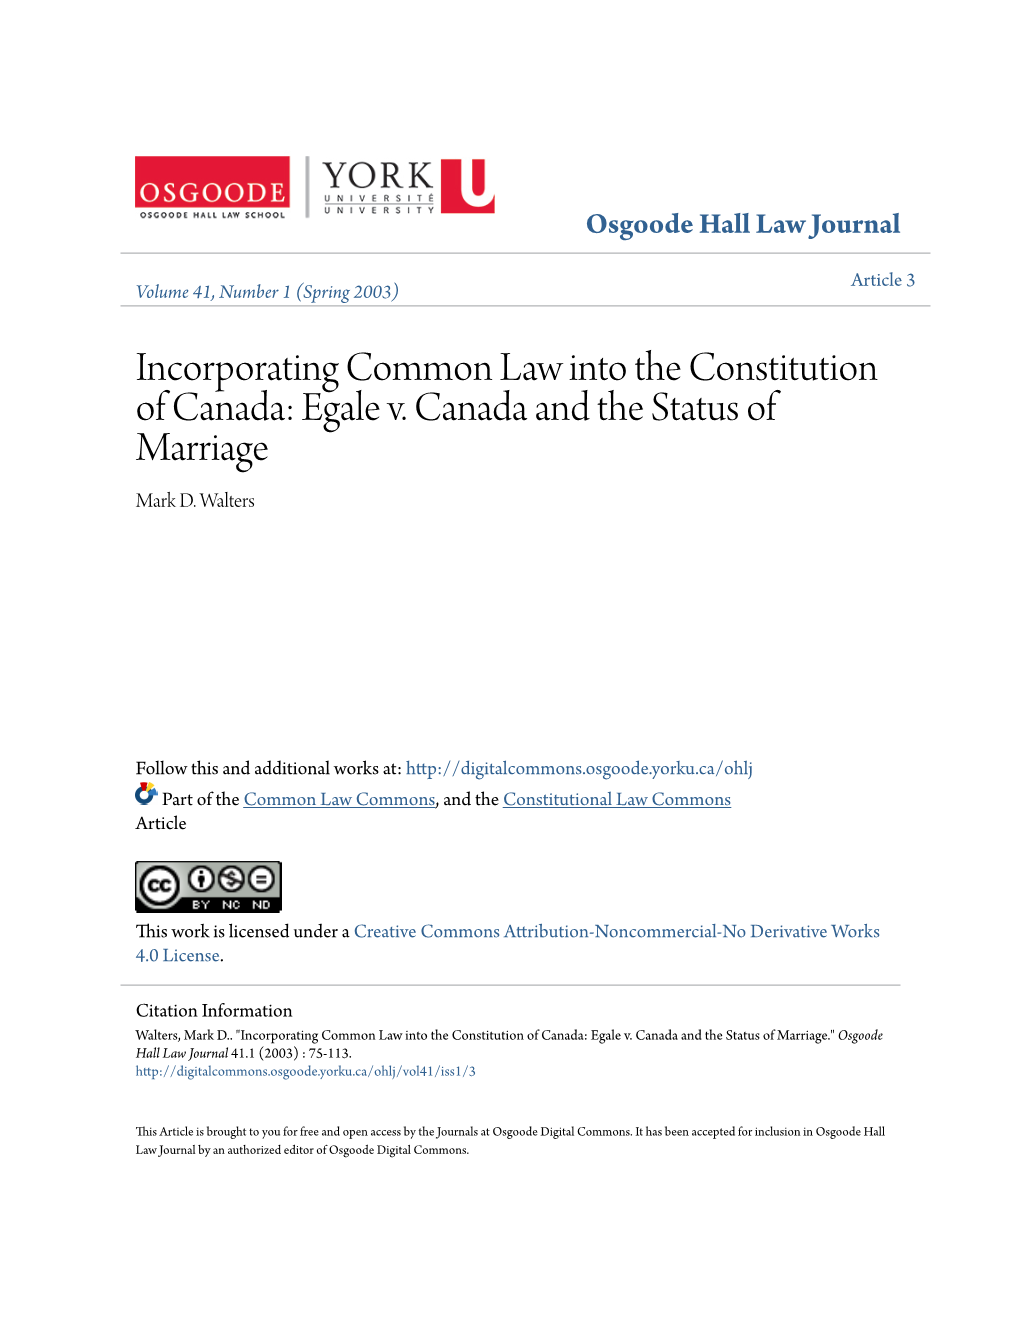 Incorporating Common Law Into the Constitution of Canada: Egale V